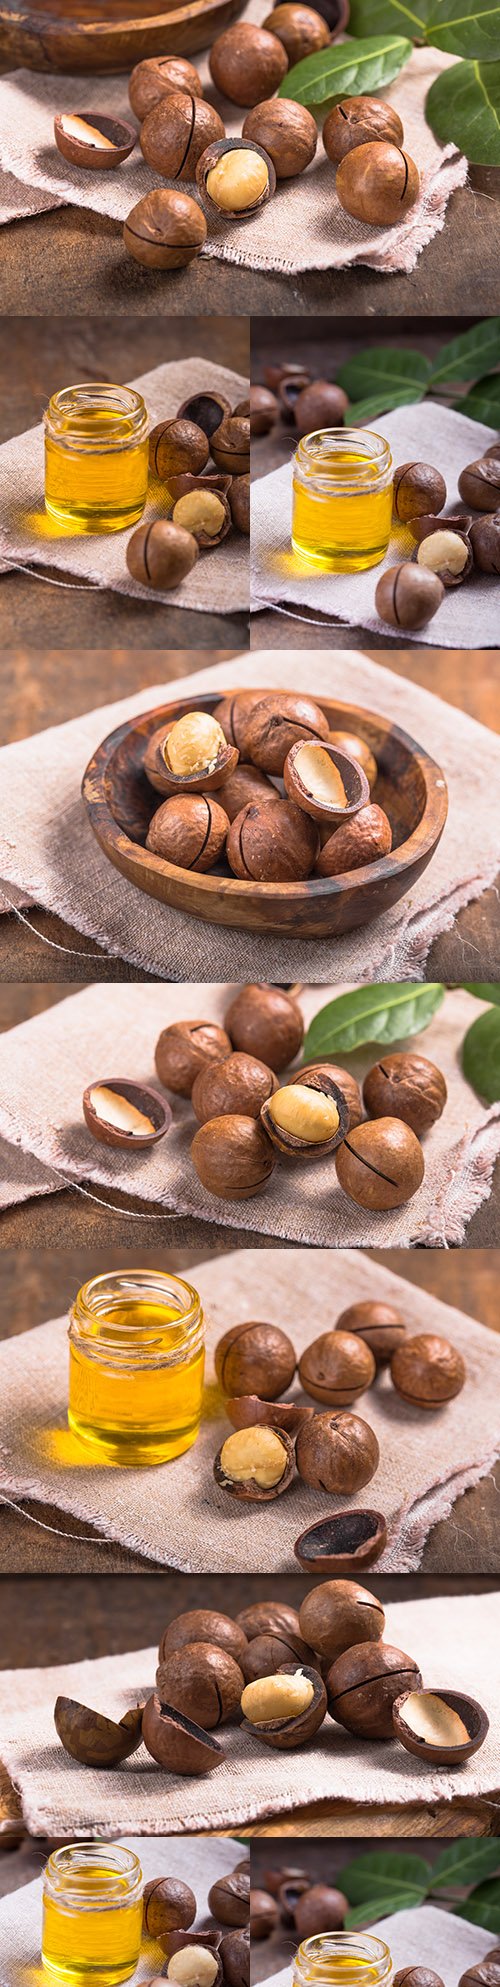 Aromatic oil and macadamia nut with leaves on sac